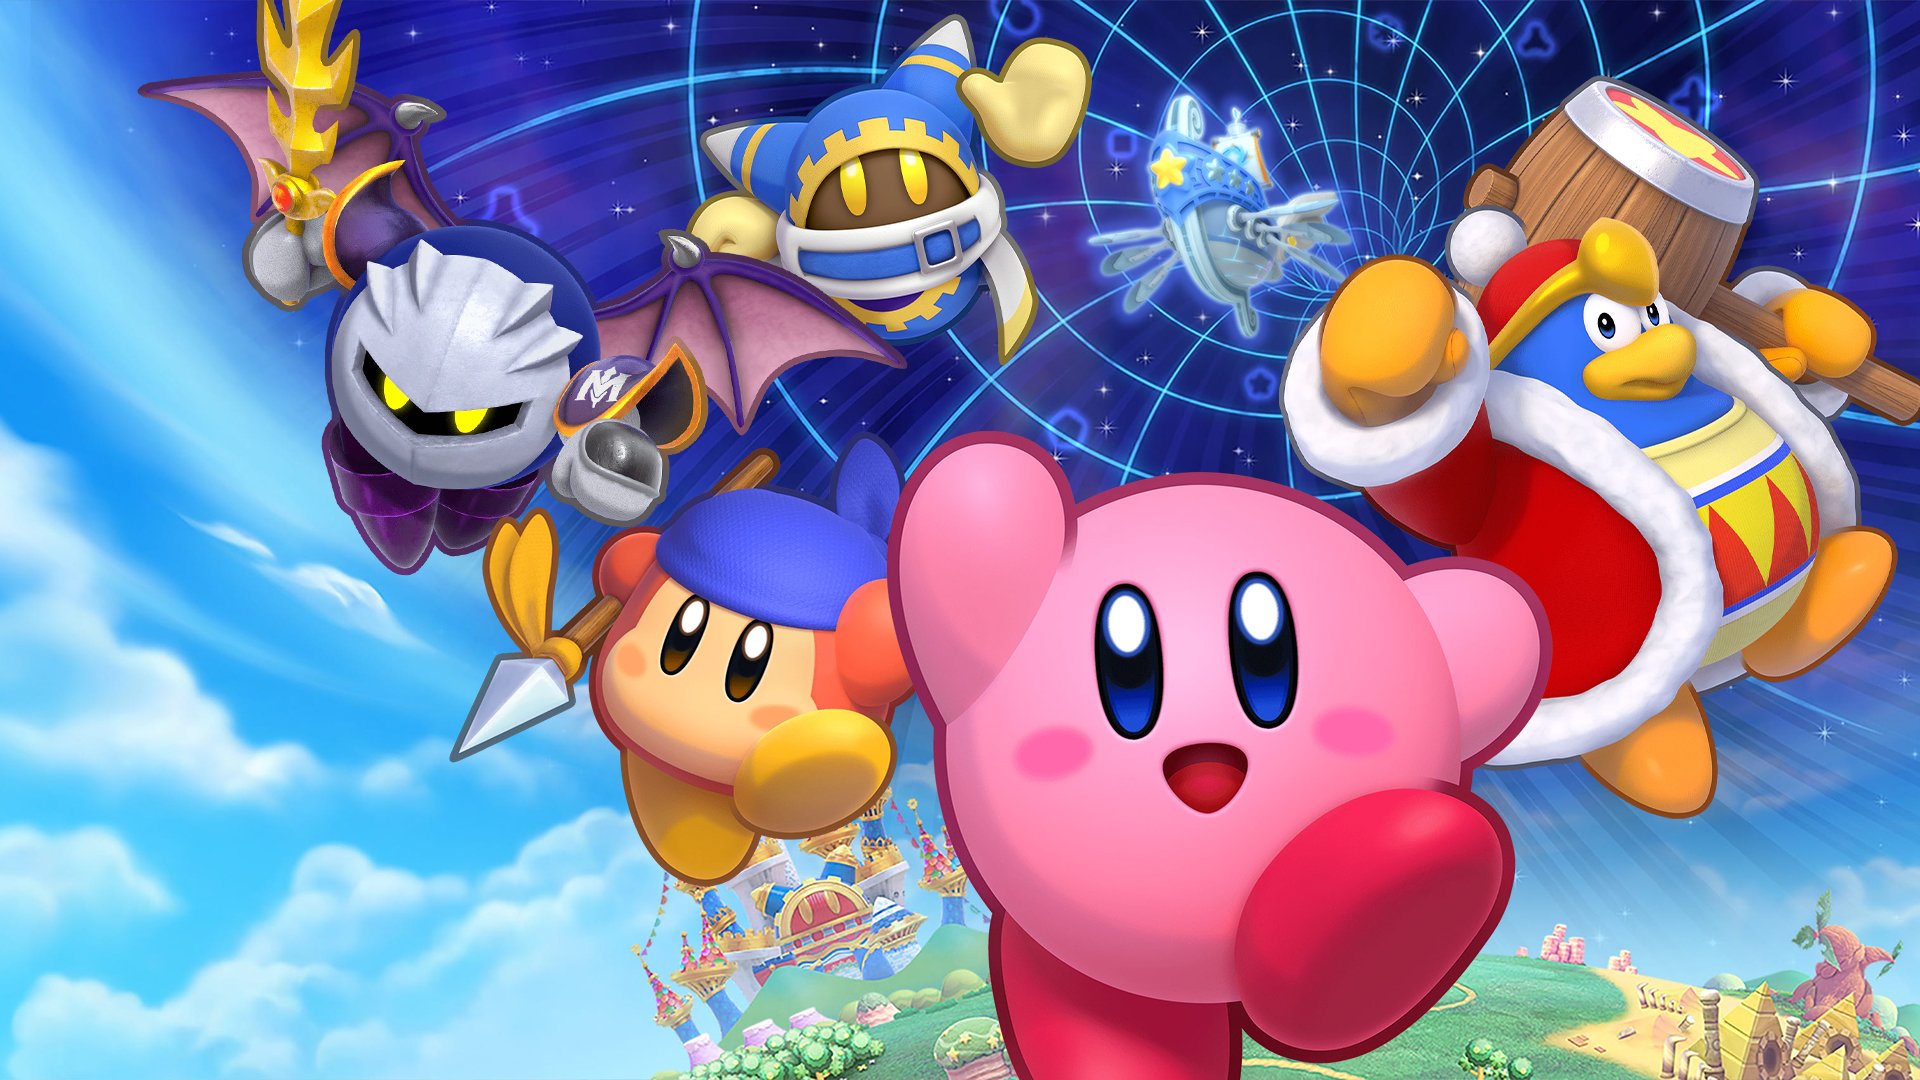 What to know about 'Kirby's Return to Dream Land Deluxe' before it releases  this month